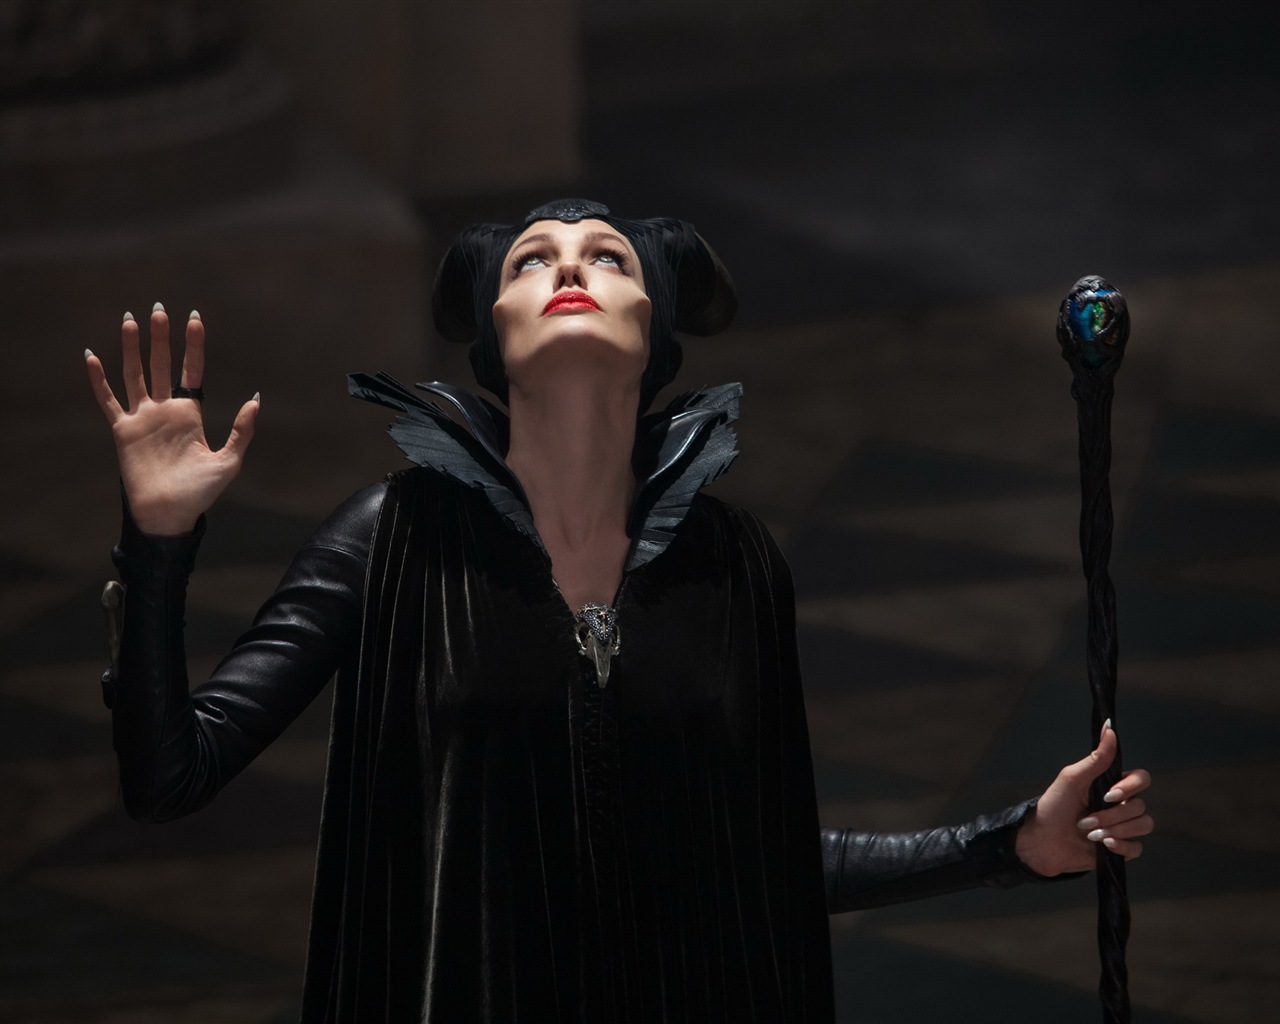 Maleficent 2014 HD movie wallpapers #4 - 1280x1024